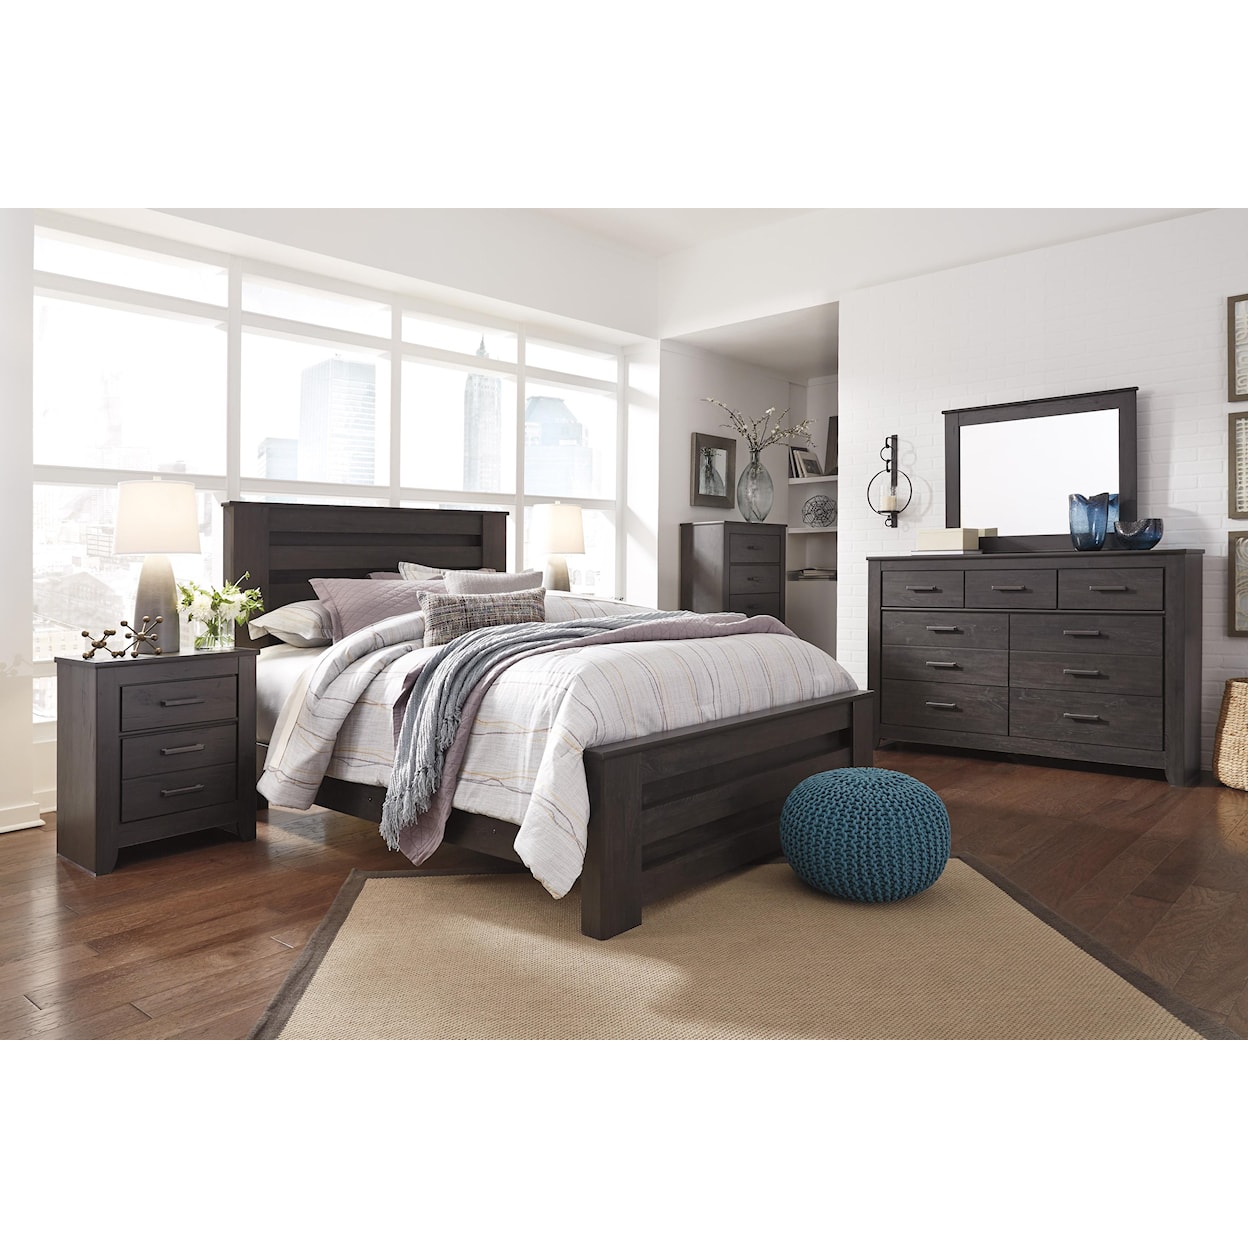 Signature Design by Ashley Brinxton King Panel Bed Package